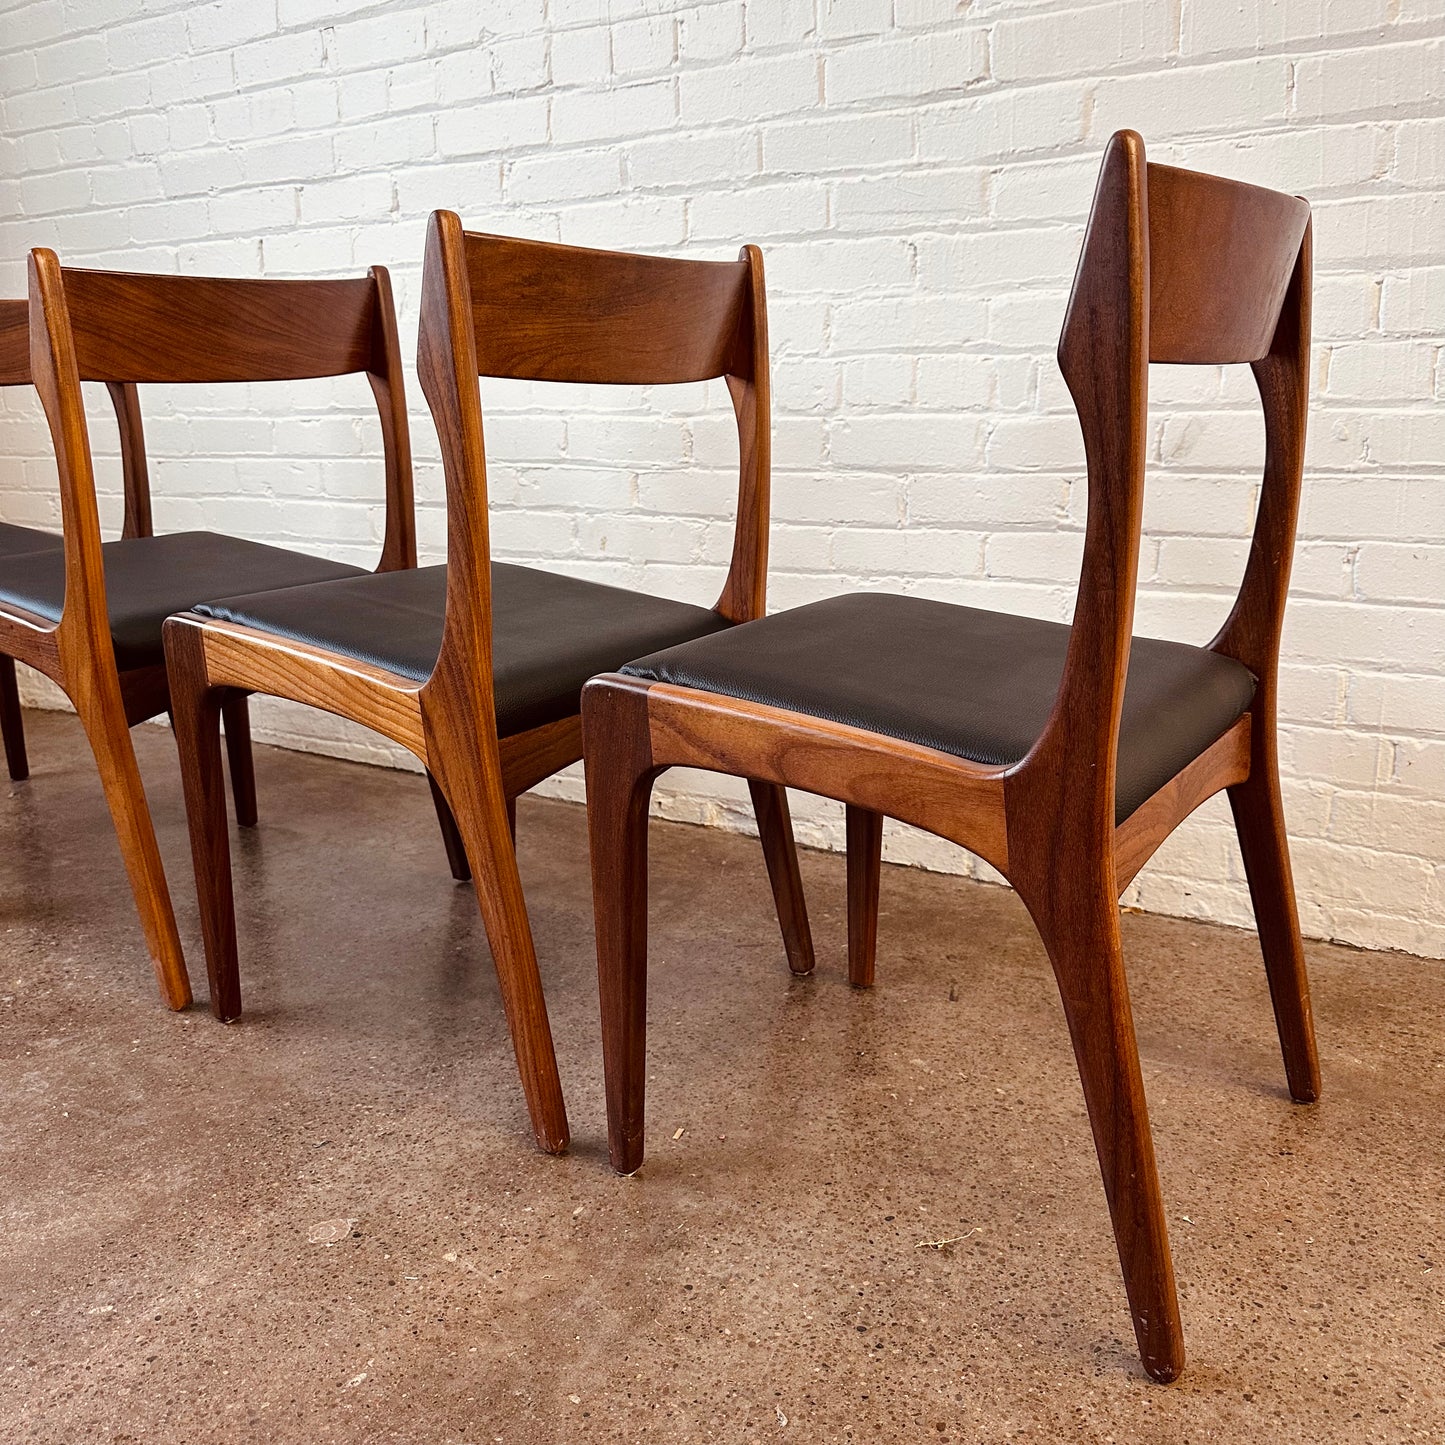 R HUBER TEAK DINING CHAIRS - SET OF FOUR